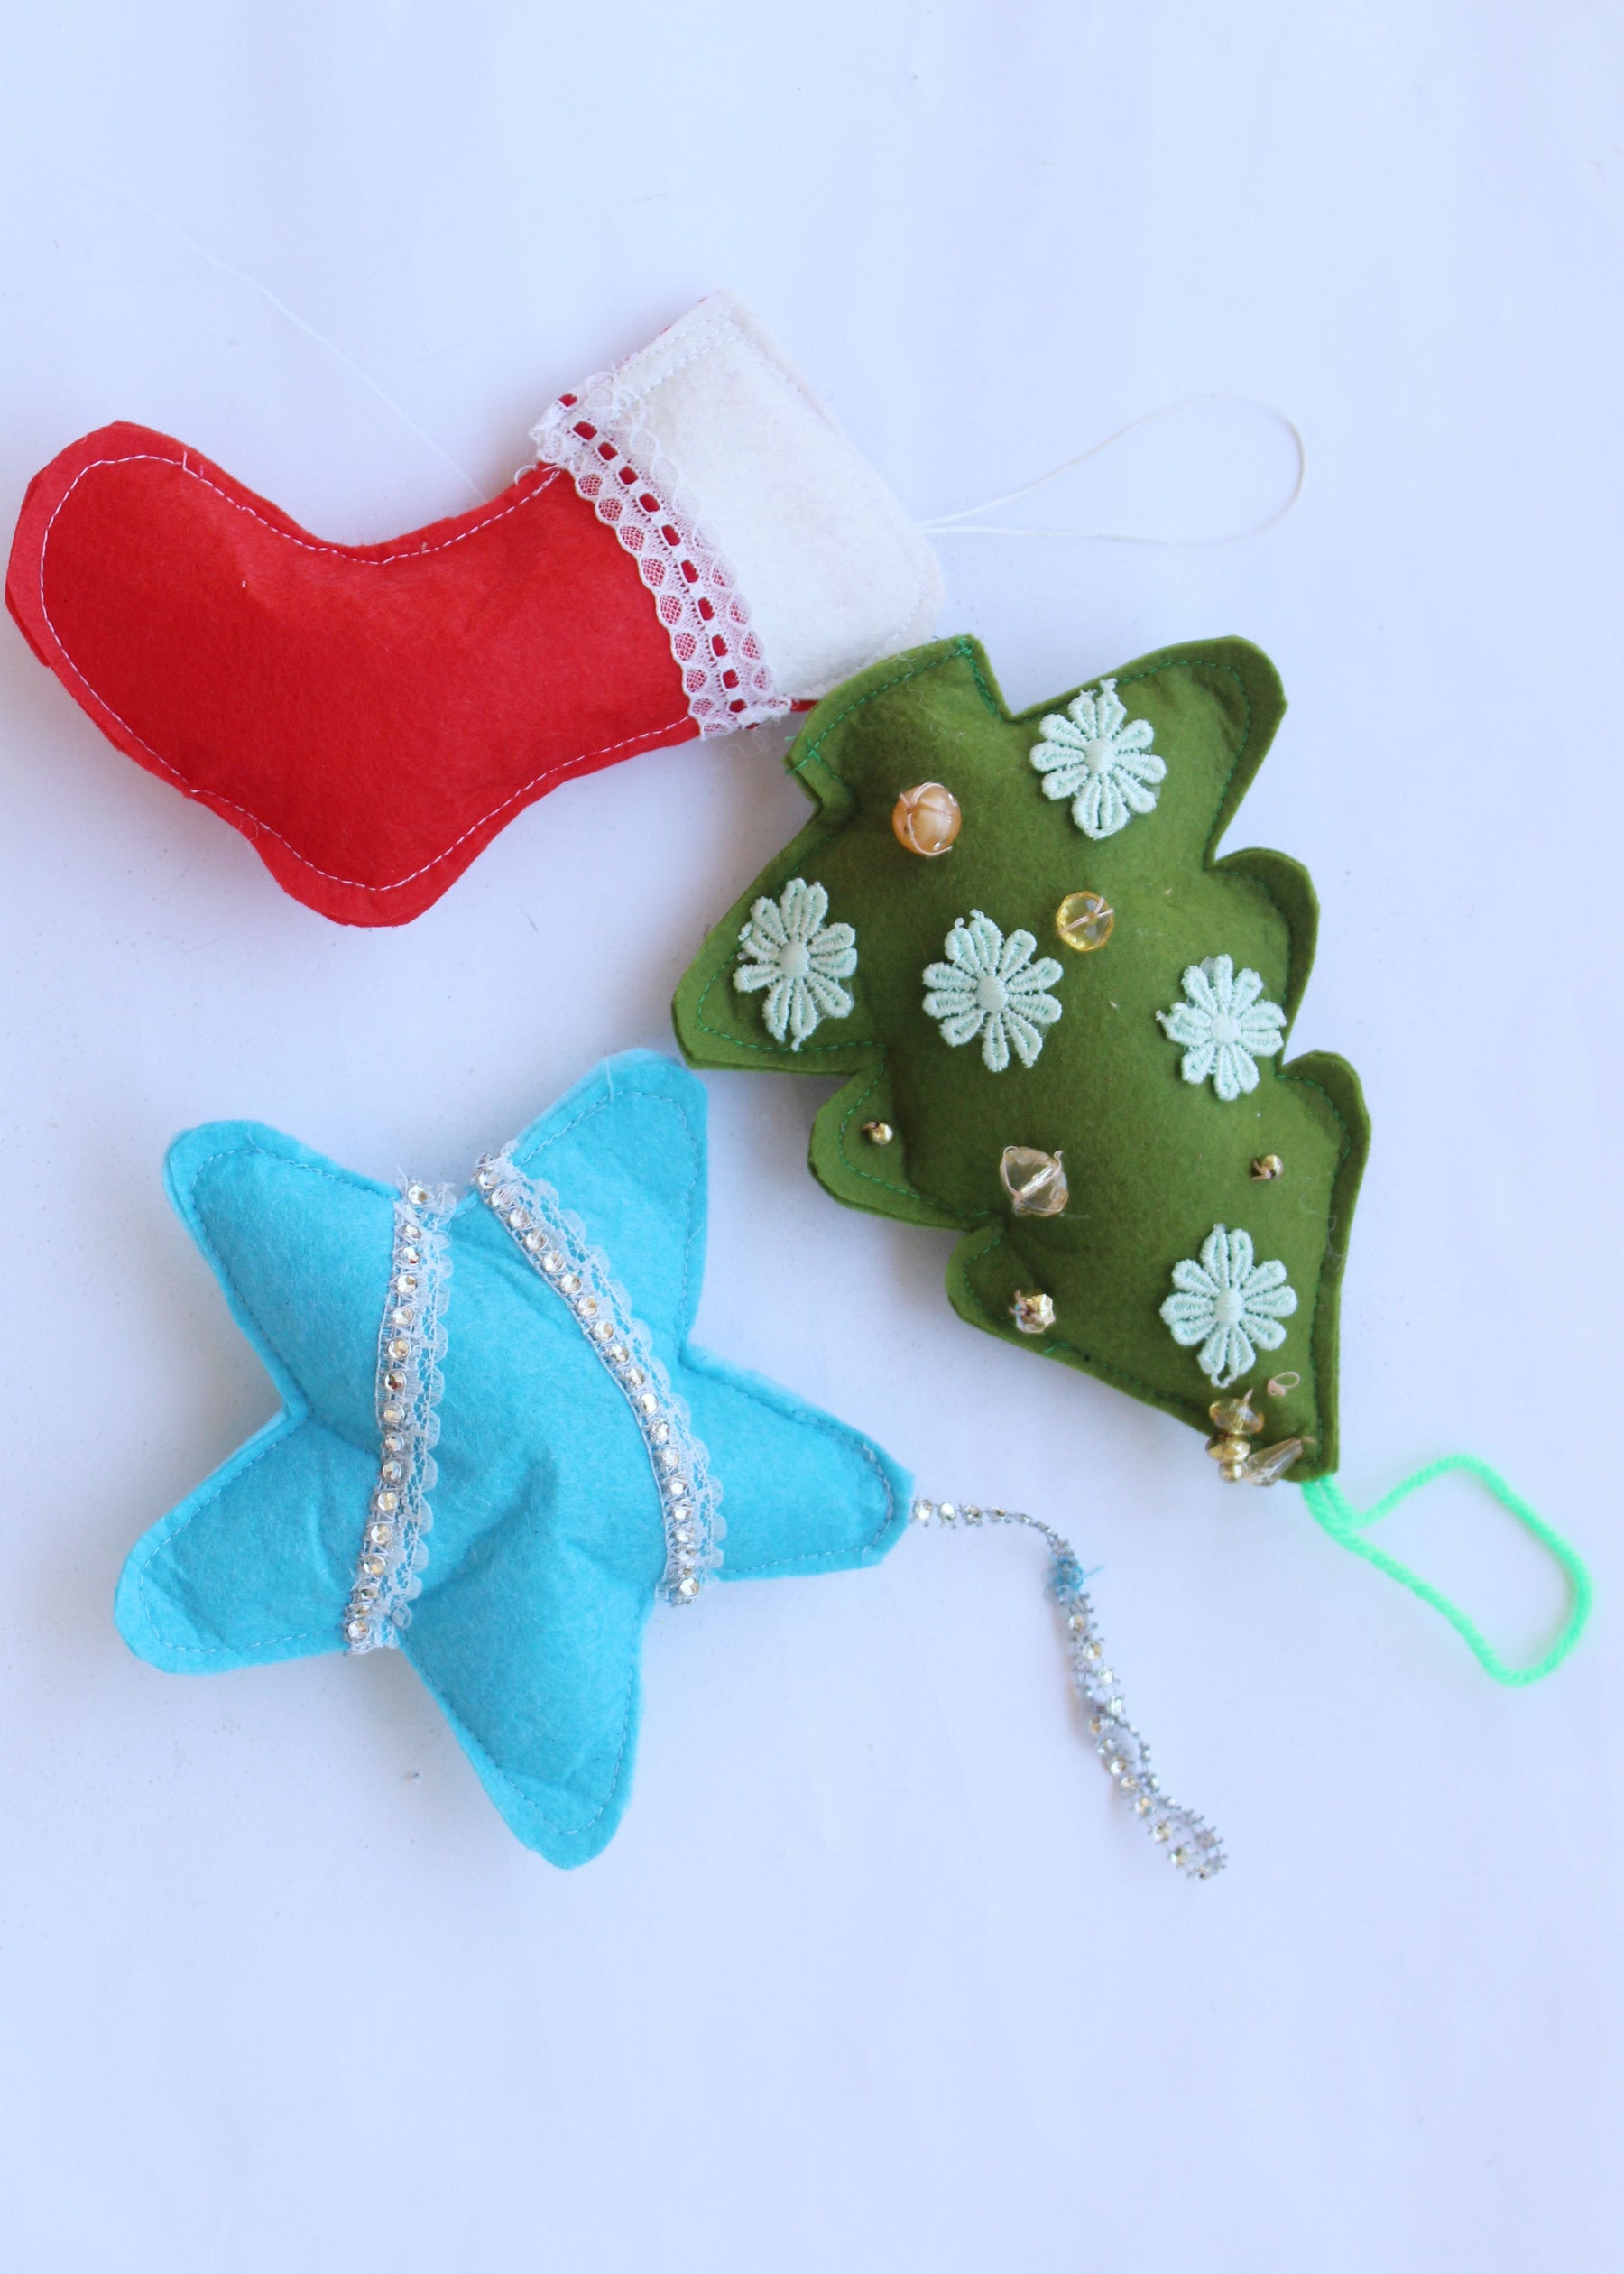 Wool Felt Christmas Stocking from India - Gingerbread Feast